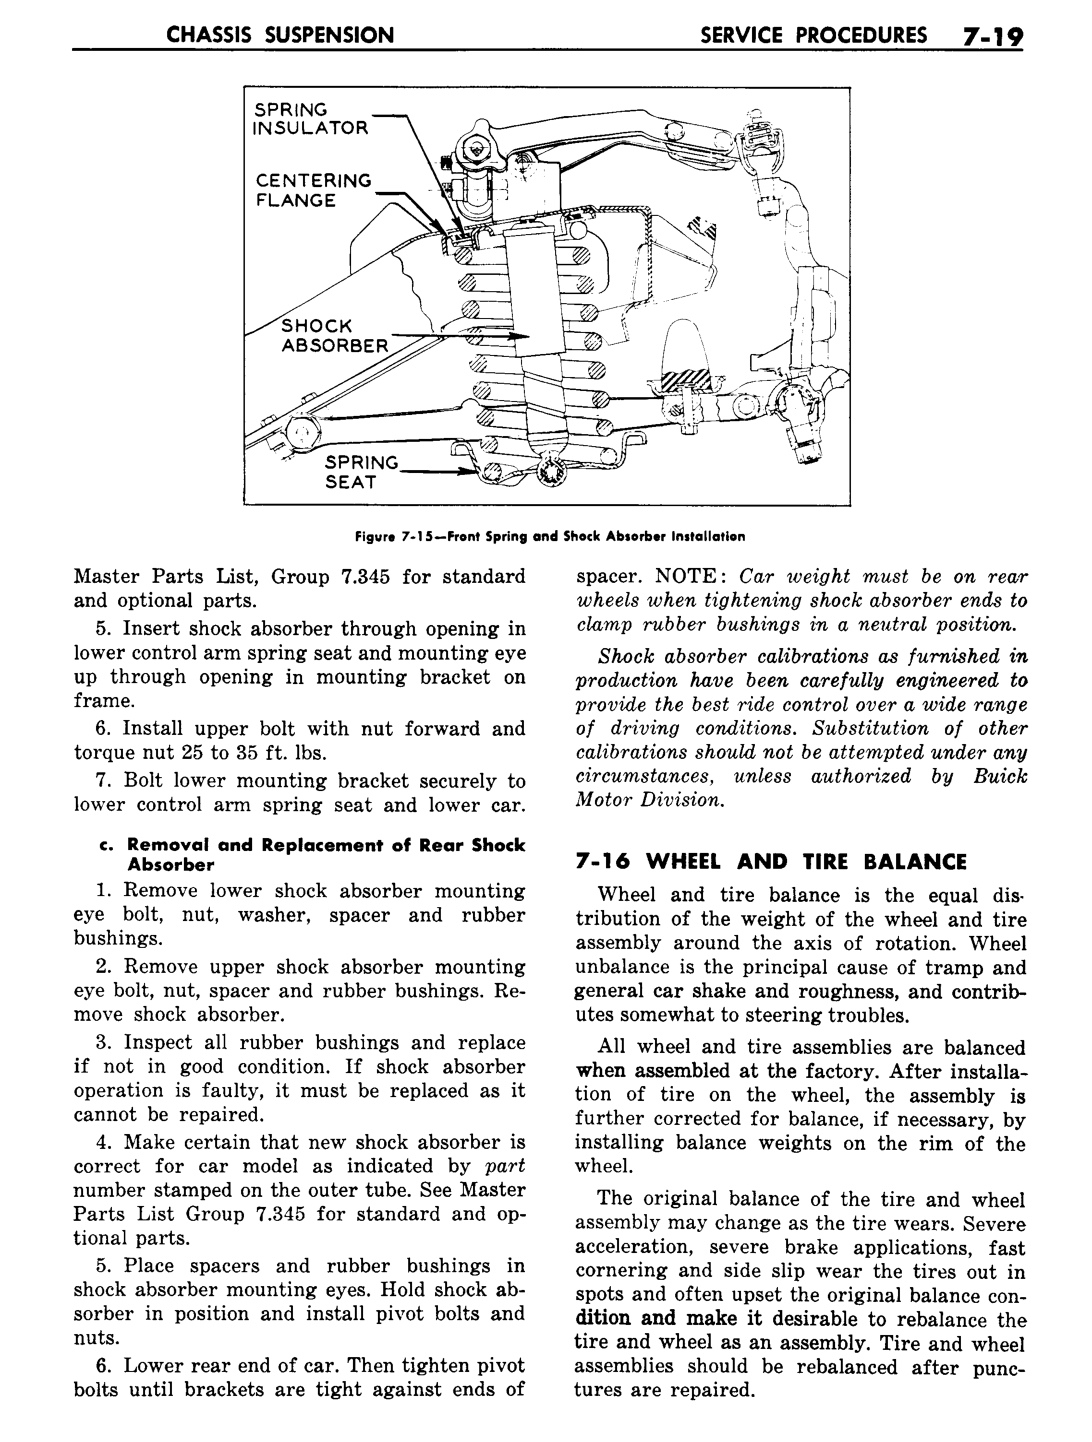 n_08 1957 Buick Shop Manual - Chassis Suspension-019-019.jpg